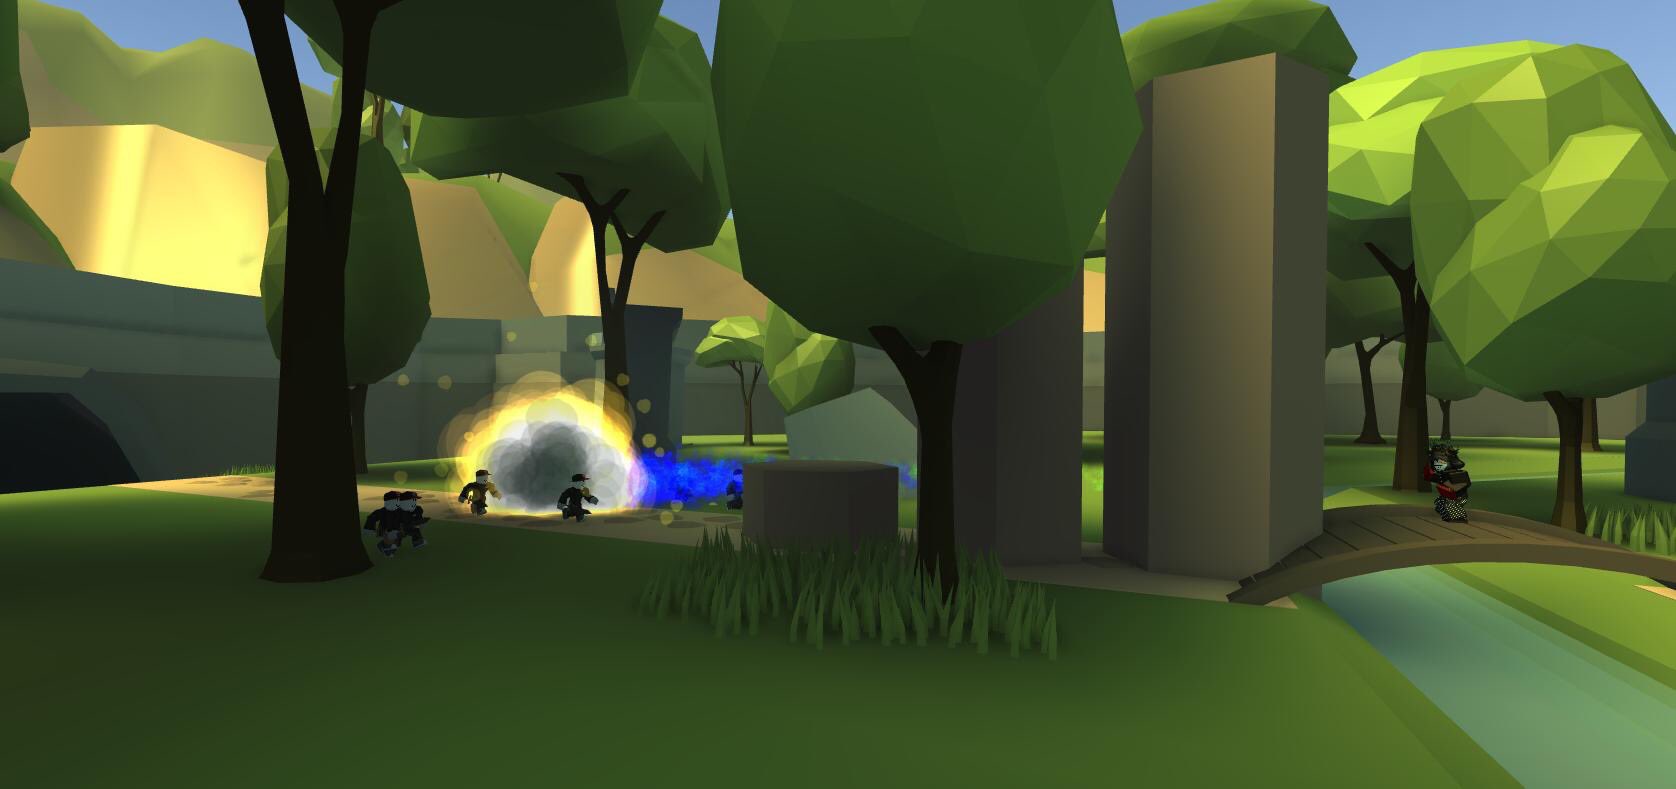 Hello Entertainment Bloxyawards Bloxys Roblox On Twitter Guest Defense Is Riddled With Problems Hello Defunct Sorcerer The Sorcerer Was Supposed To Cast A Plasma Ball Spell But It Glitches And Doesn T Work - guest defense roblox